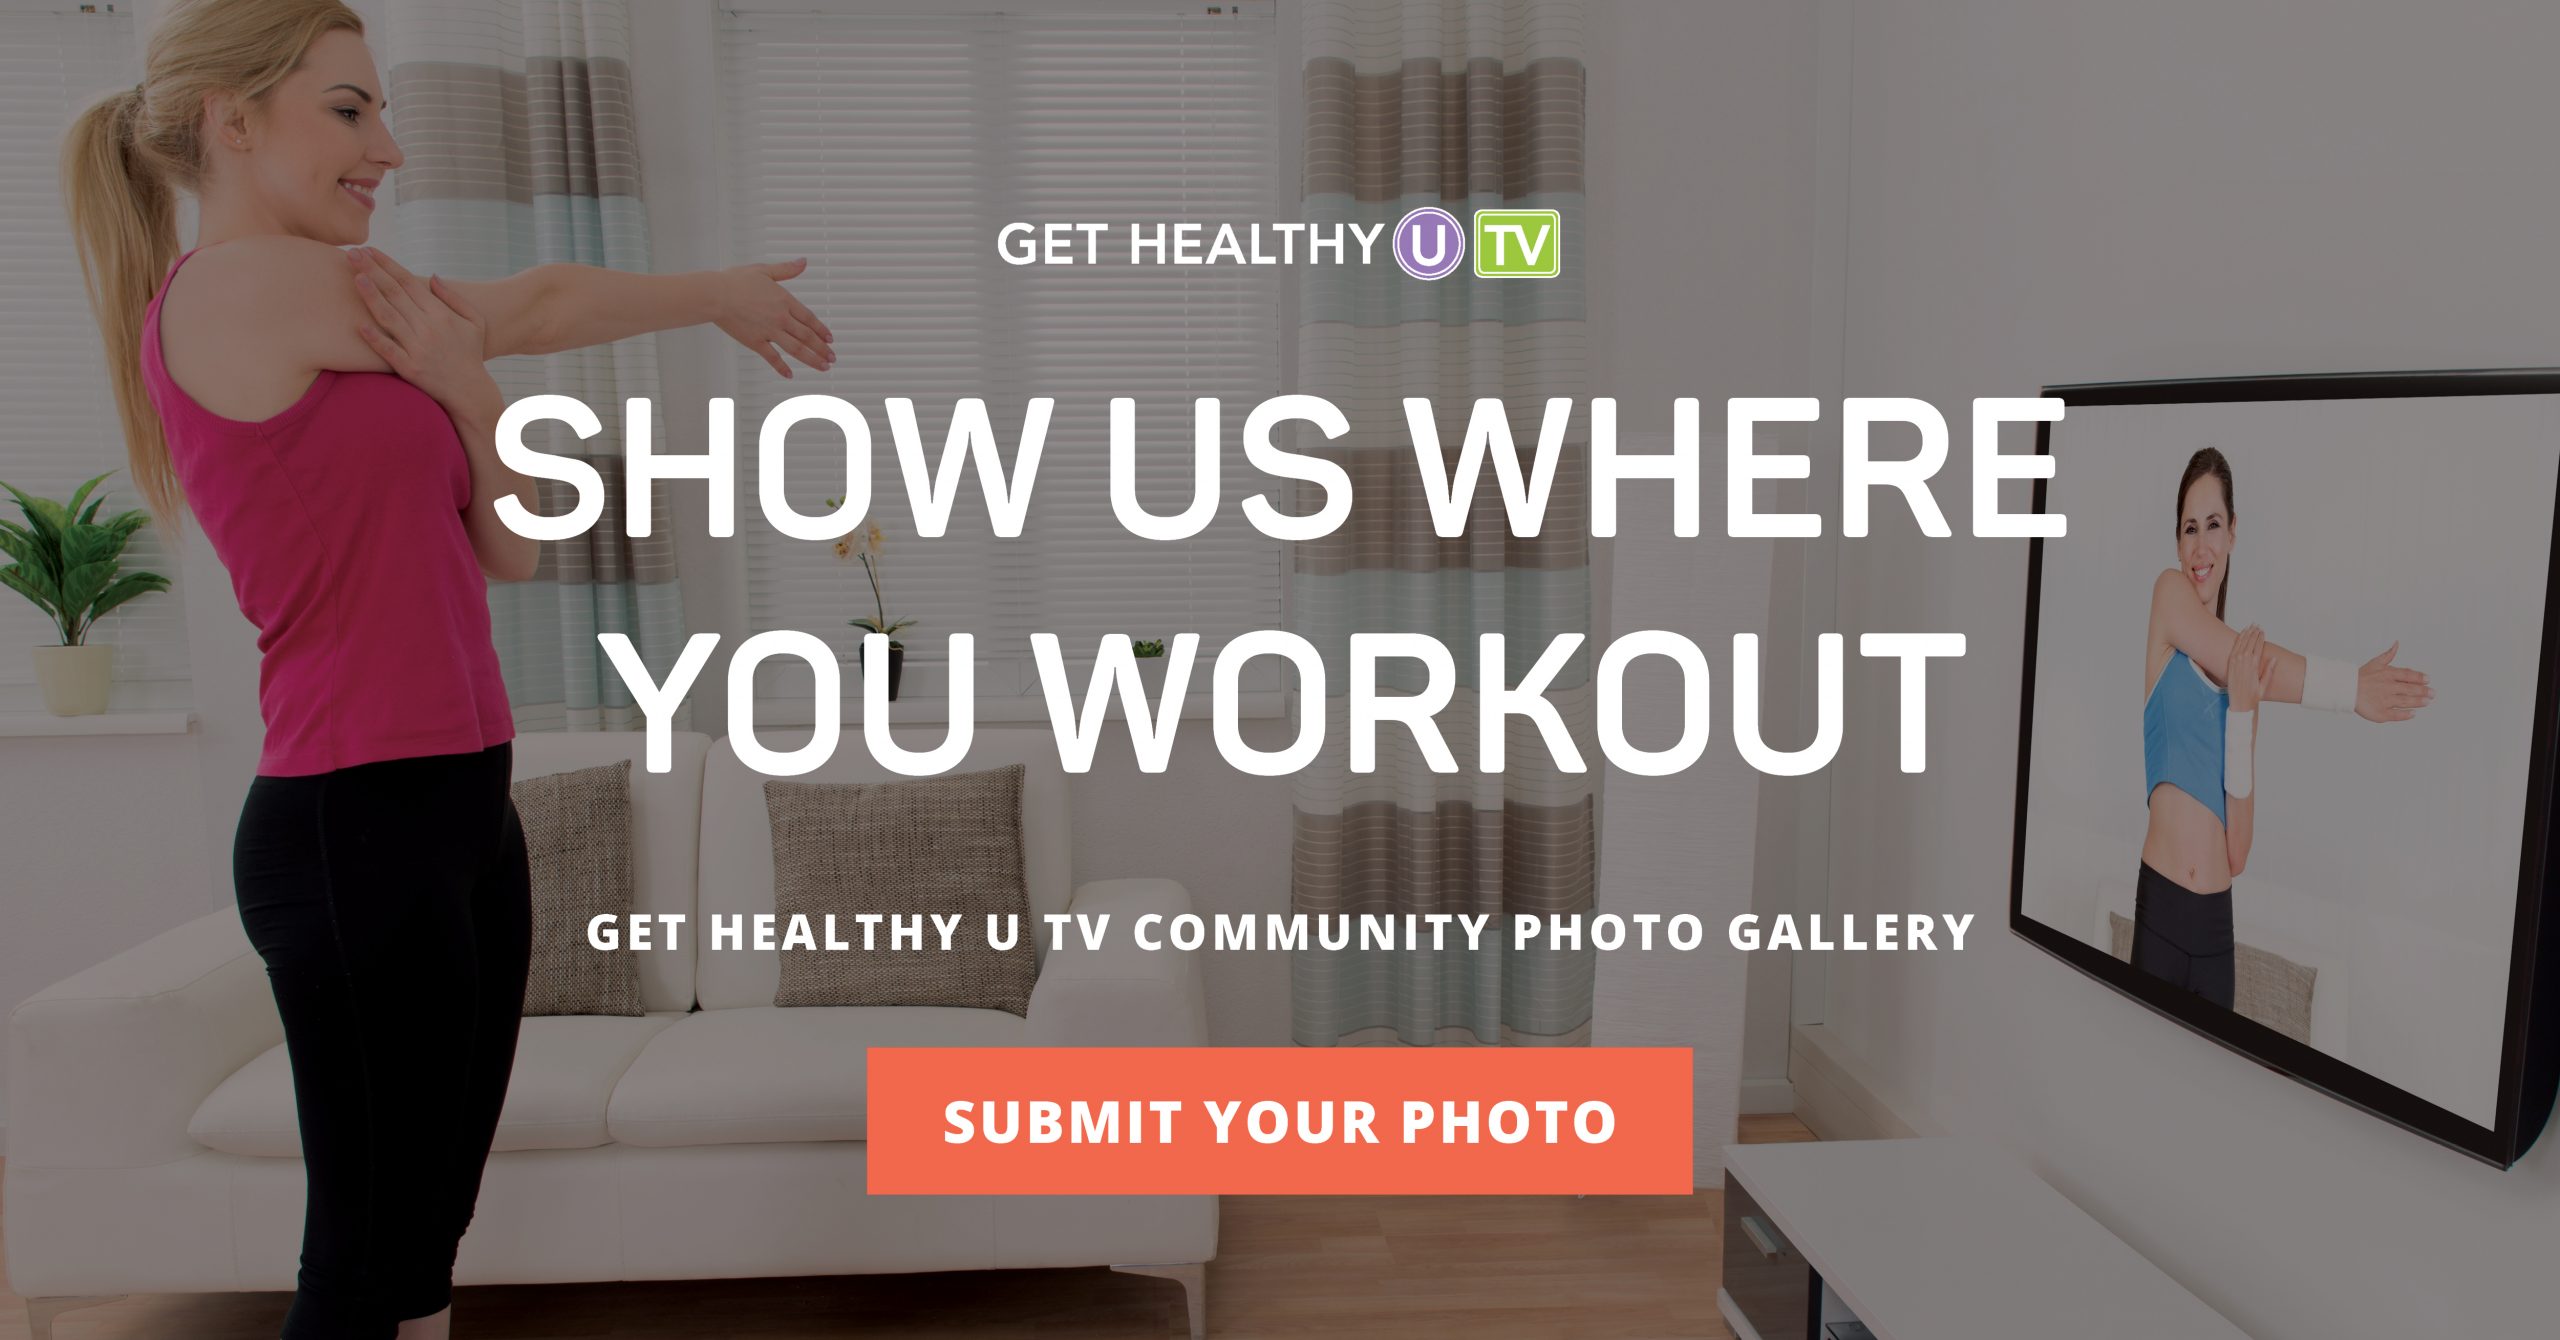 Workout At Home with Get Healthy U TV!